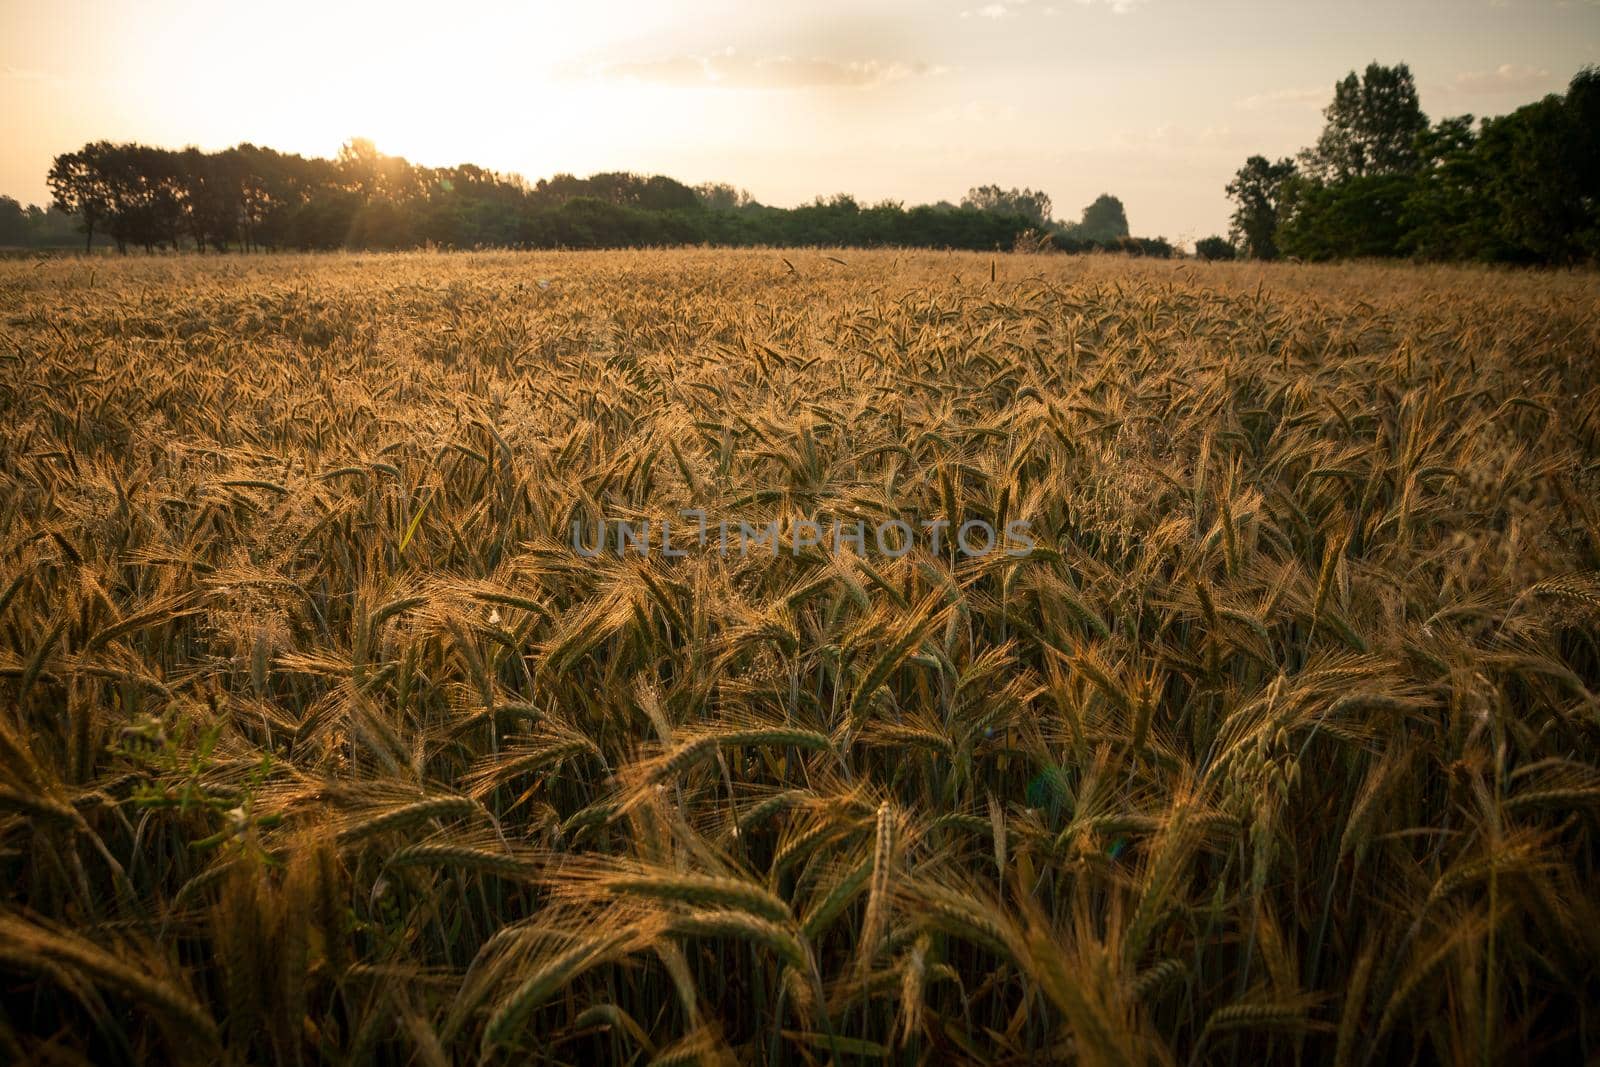 Wheat field in the early morning. Golden ears of wheat sunlit. Wheat field with blue and golden sky and trees.